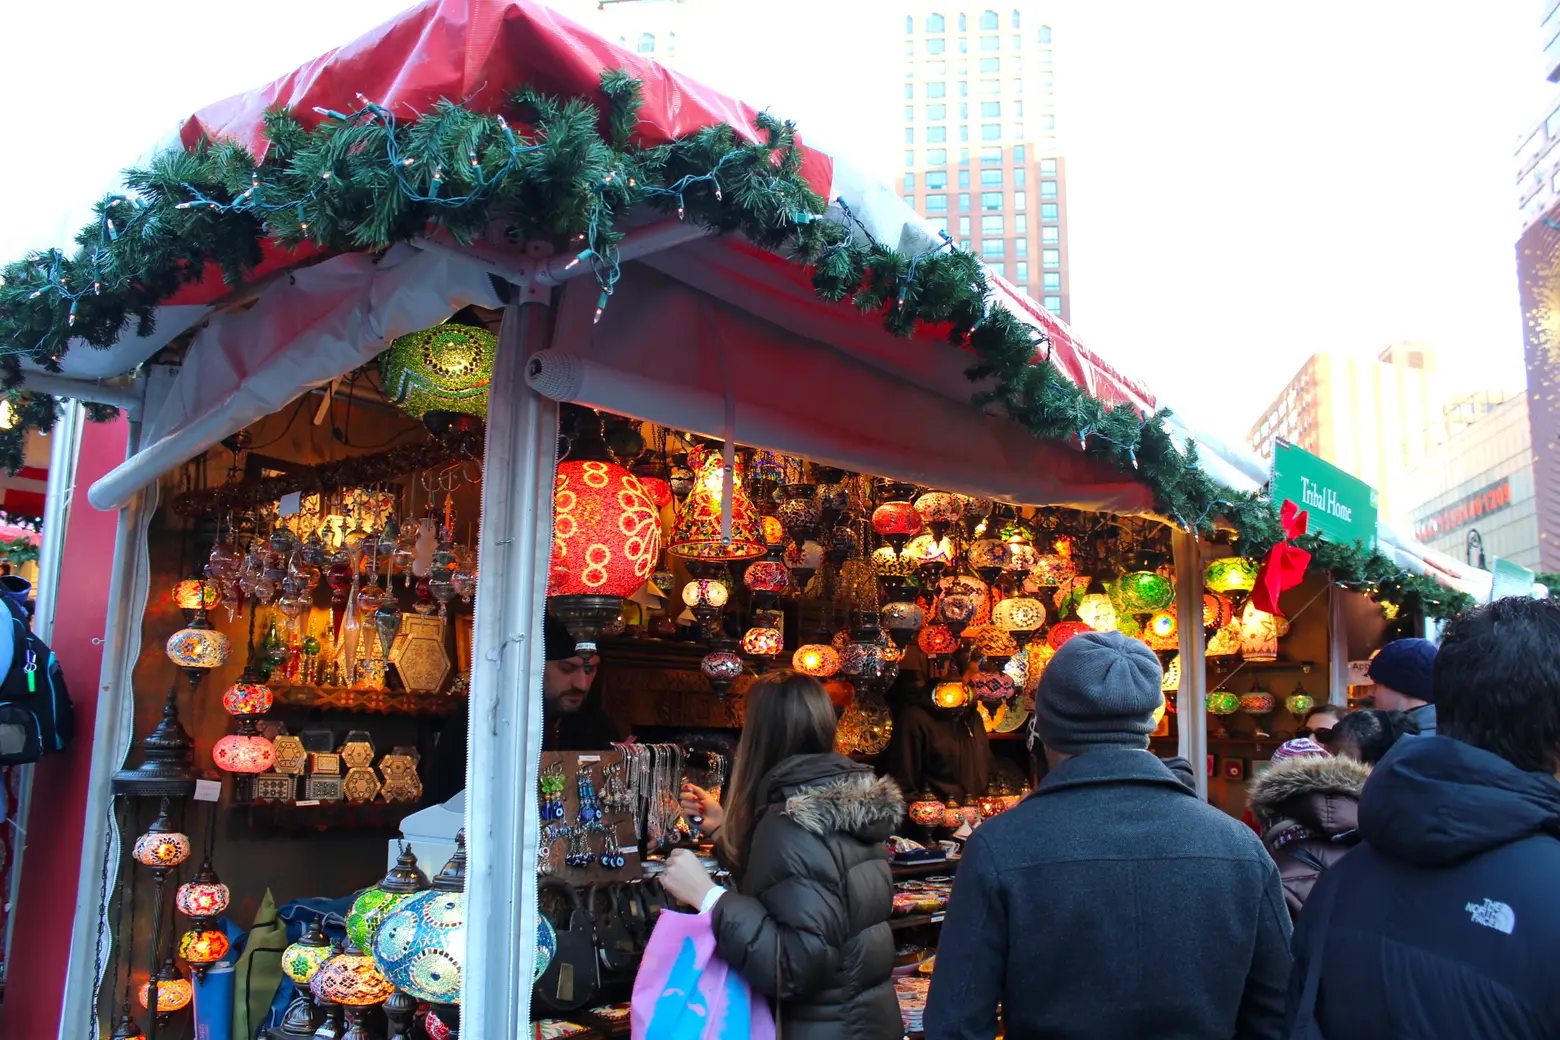 Union Square Holiday Market will not open this year